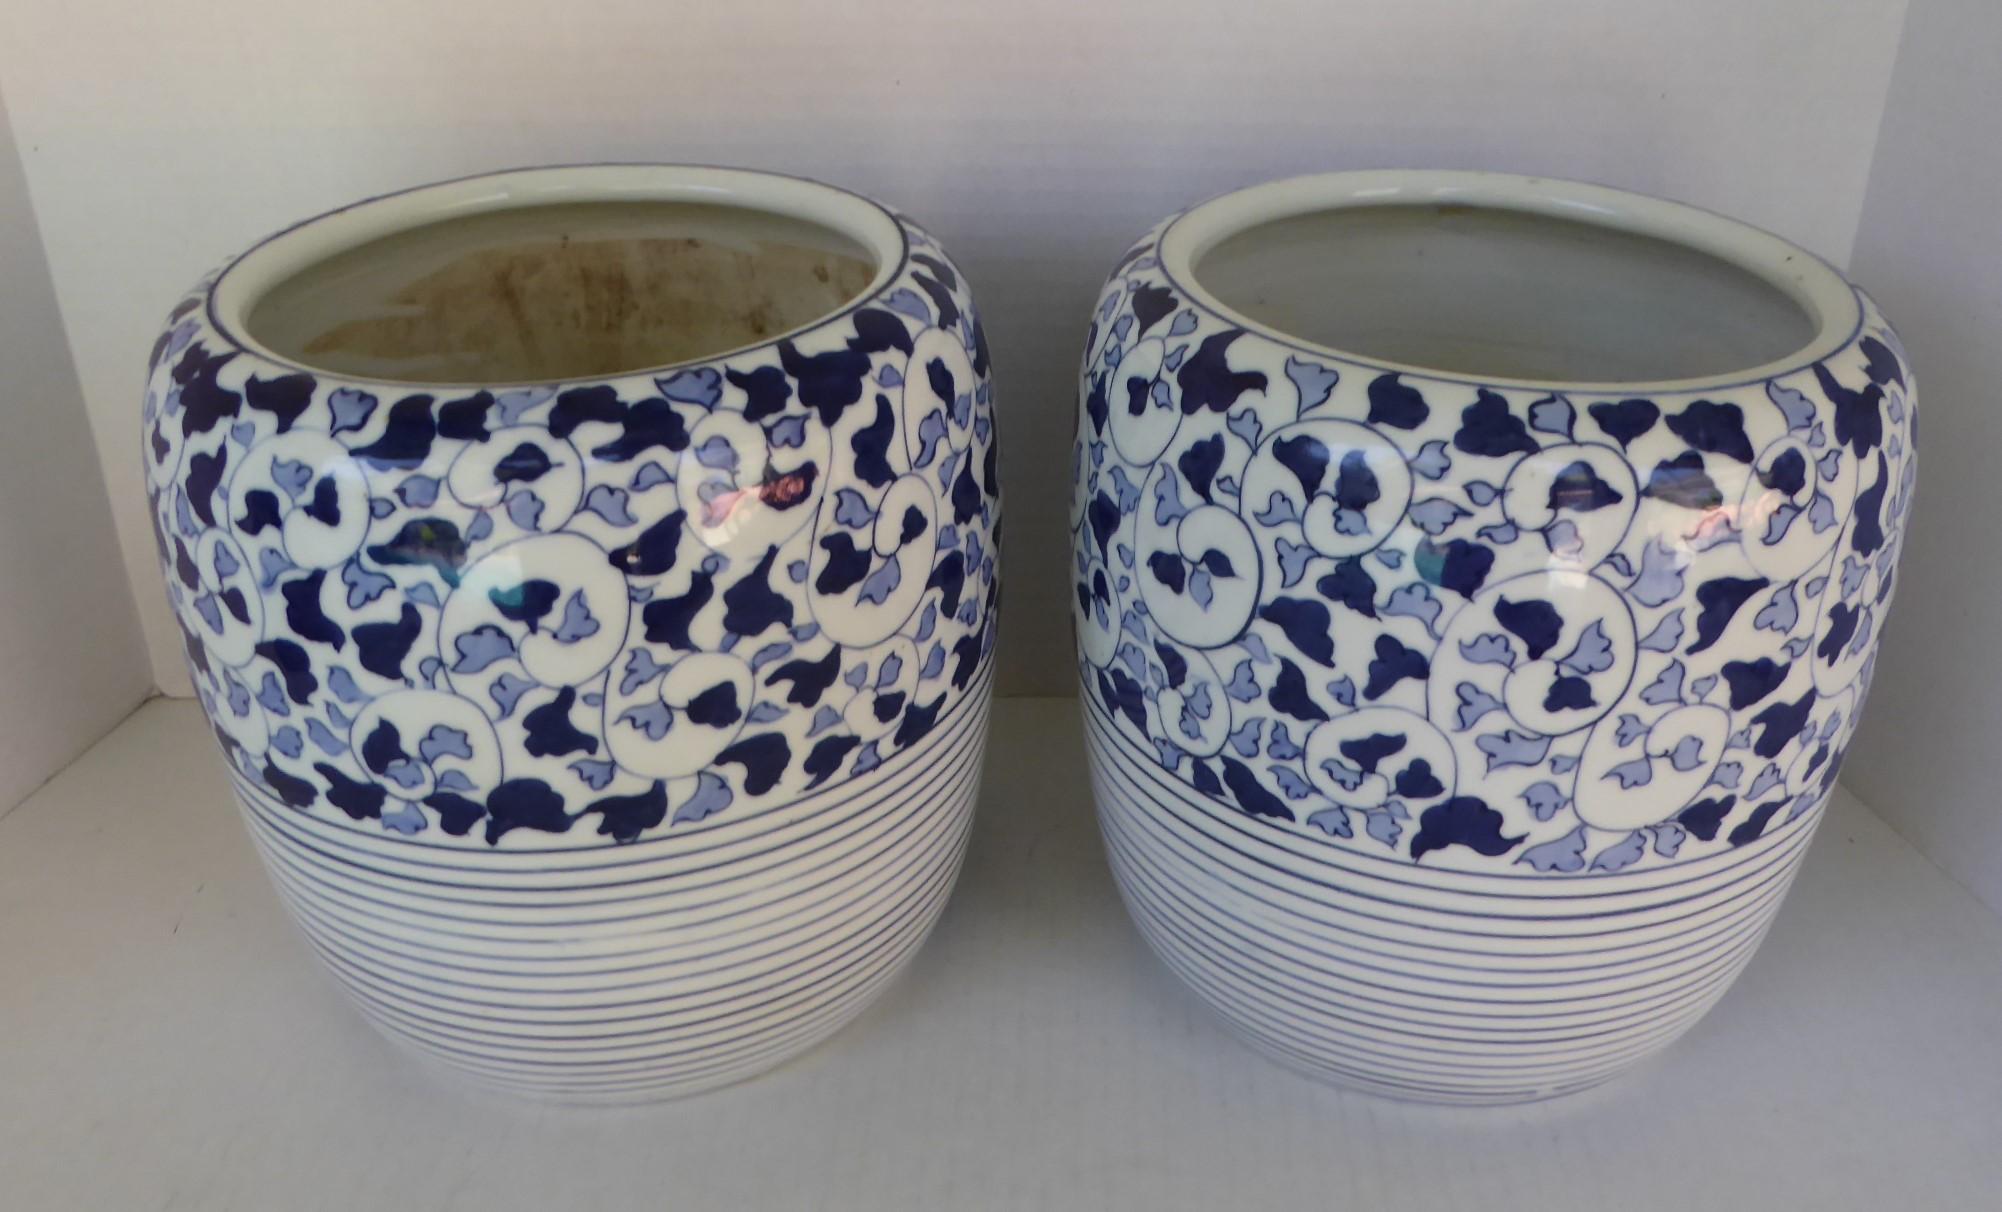 Asian modern pair of blue and white ceramic Japanese Hibachis. With a hand painted motif of winding vine with stylized dark and light blue leaves on the top 2/3 of the Hibachi and bands of blue in the bottom 1/3 on a white vitreous body.
A Hibachi